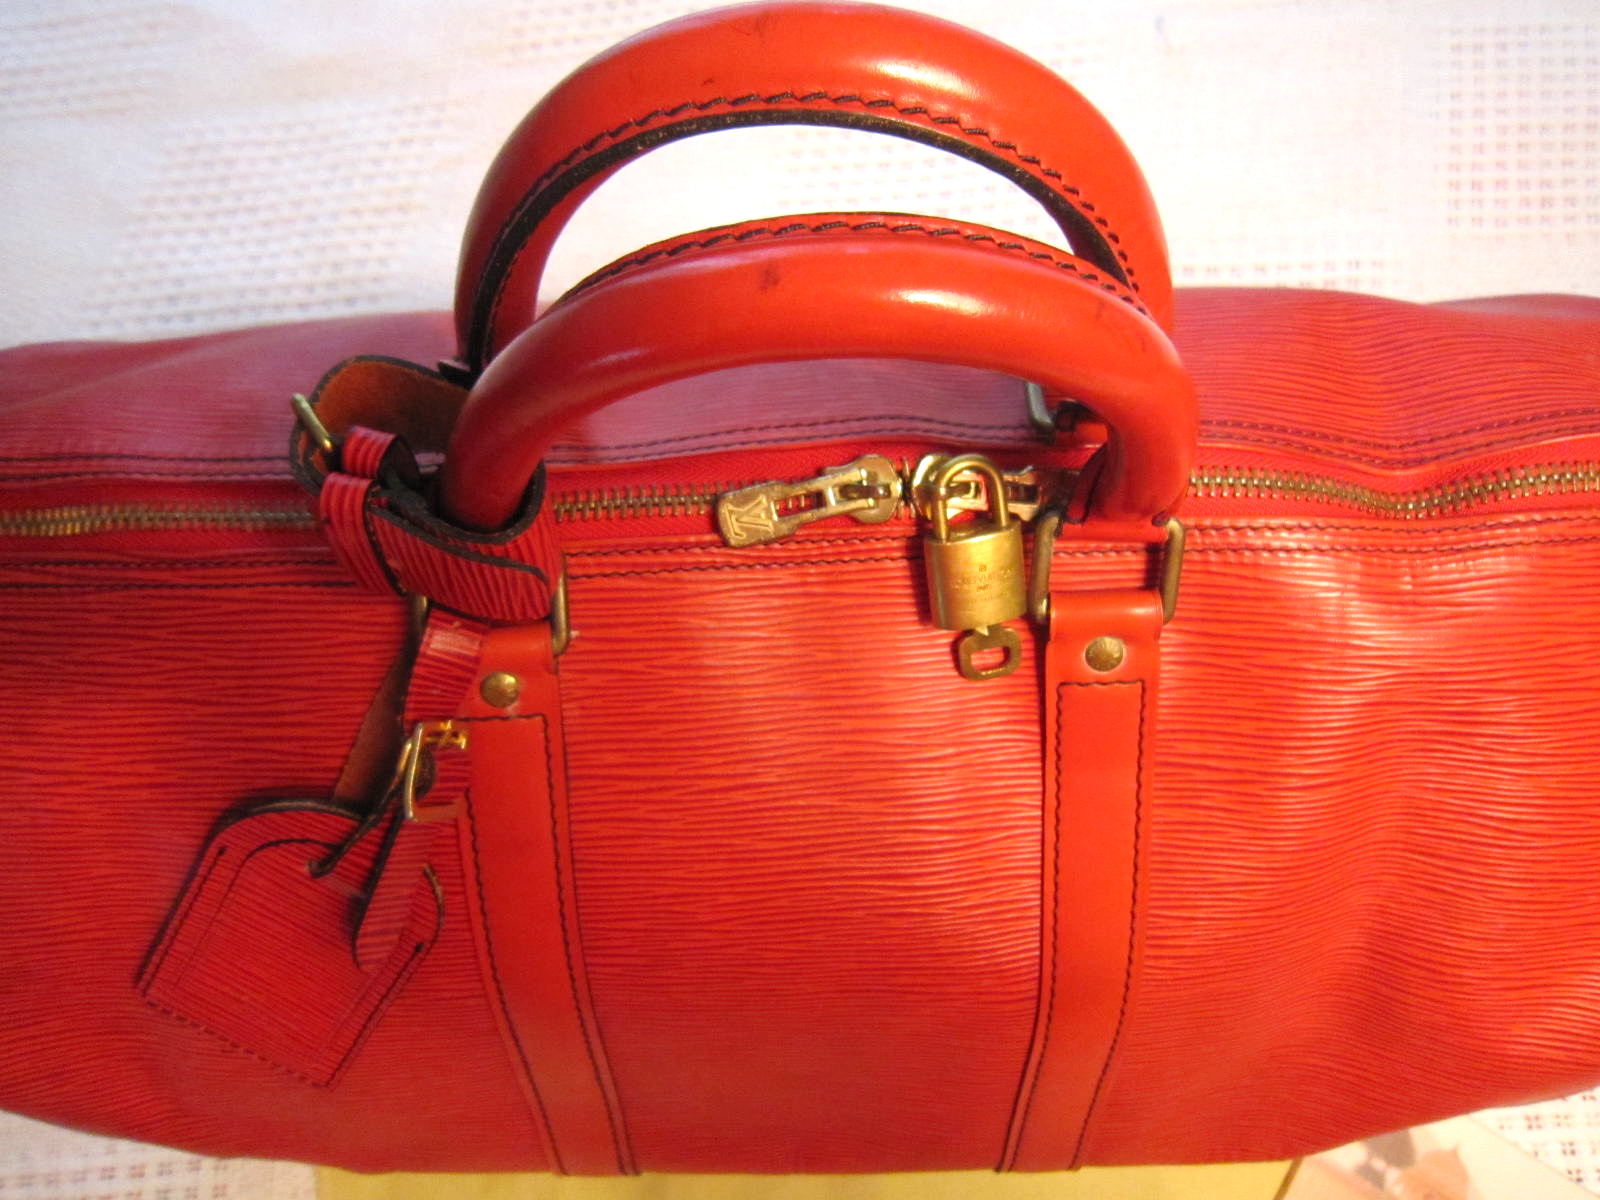 Louis Vuitton Red Epi Leather Keepall 50 Duffle Bag 89lk328s For